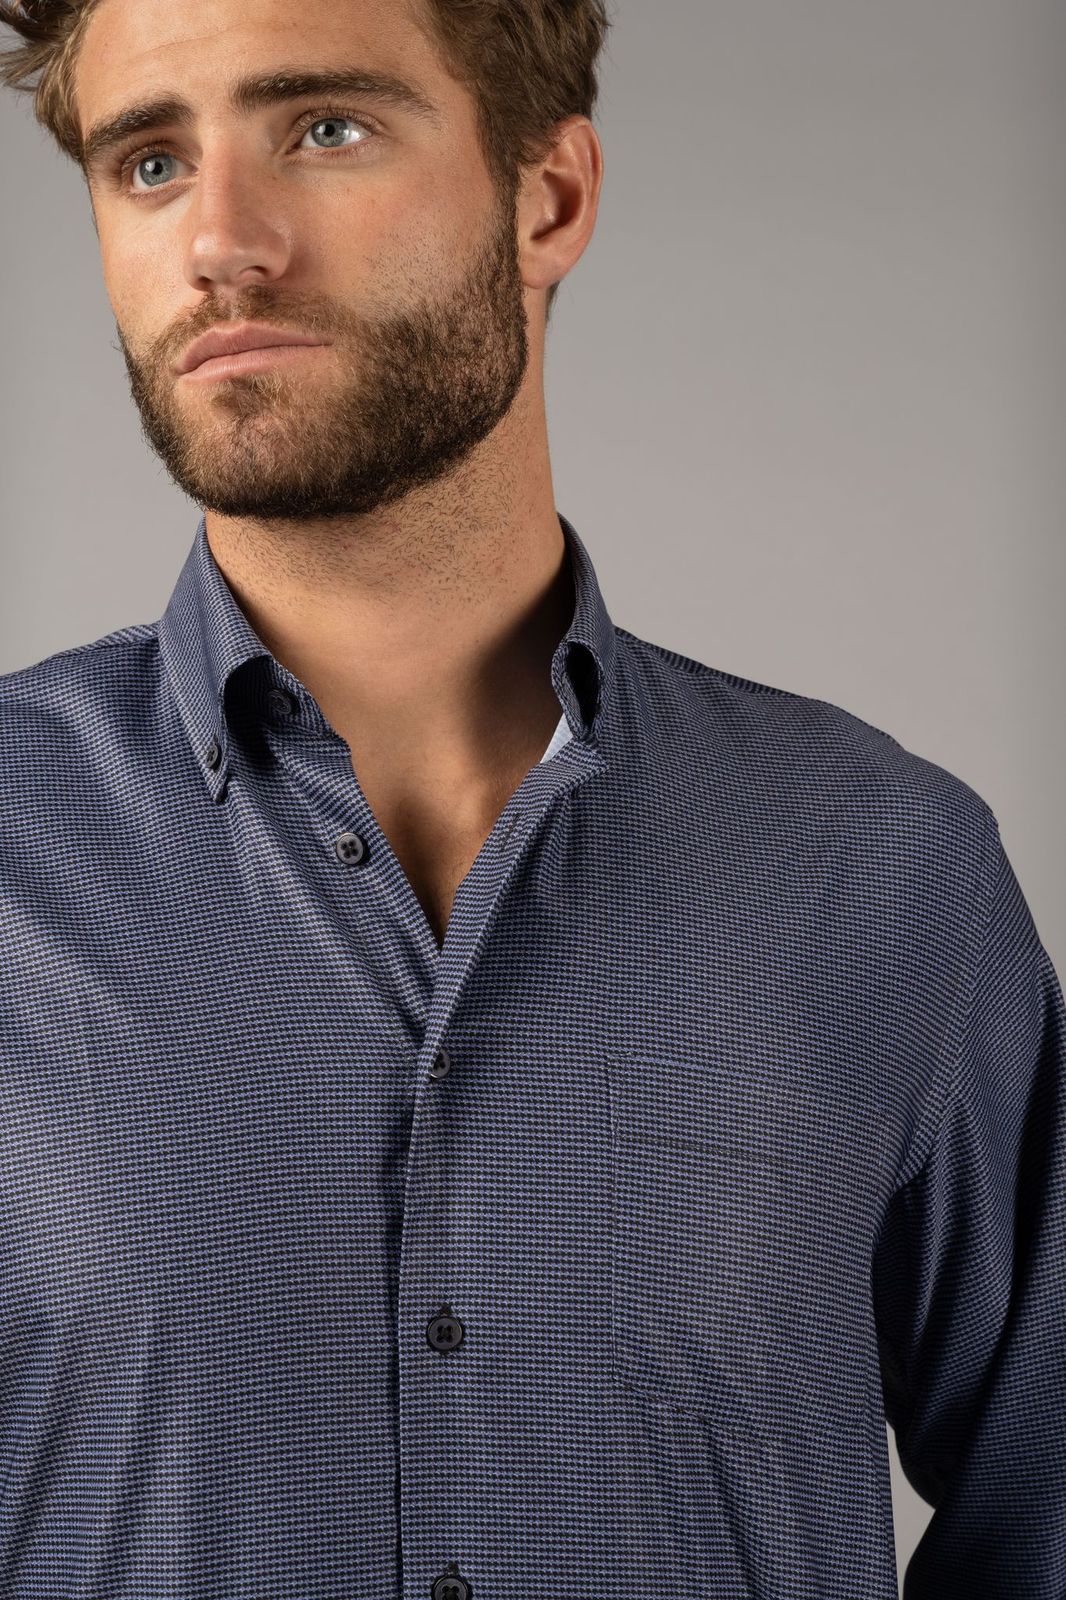 Navy Dotted Shirt